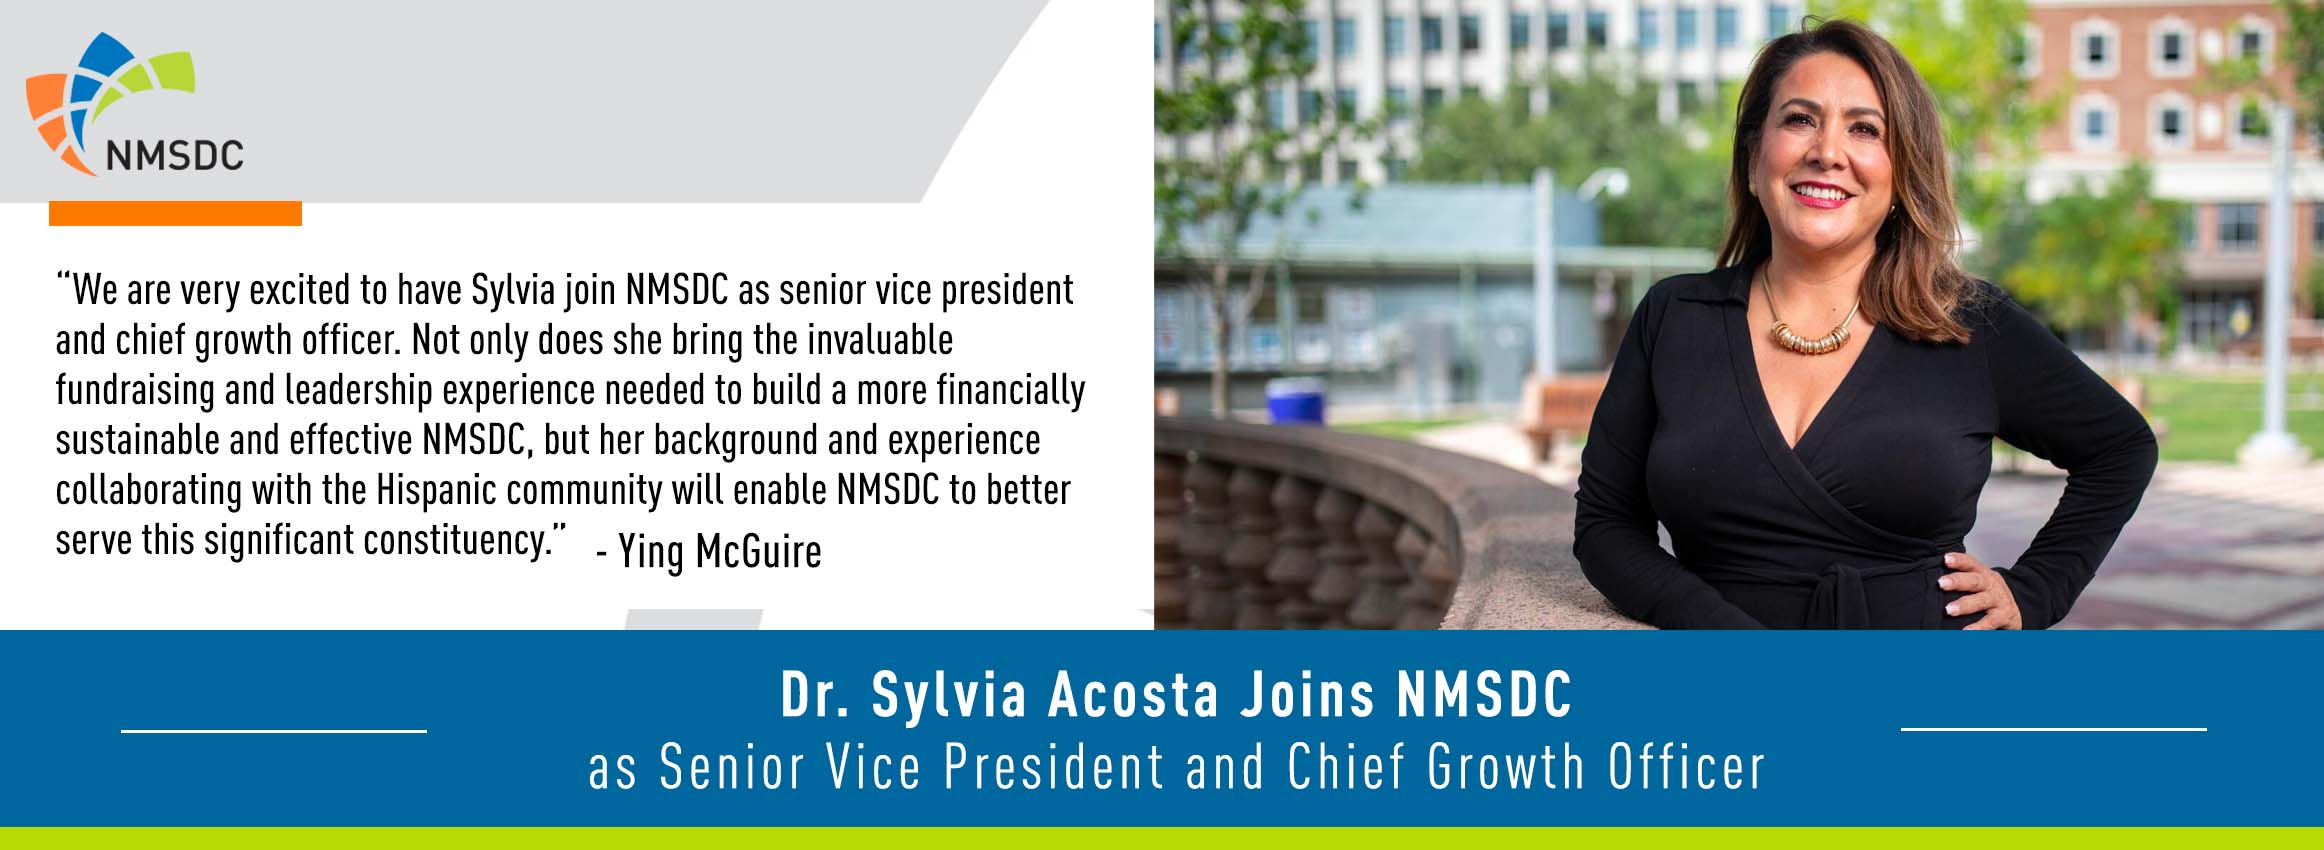 Dr. Sylvia Acosta Joins NMSDC